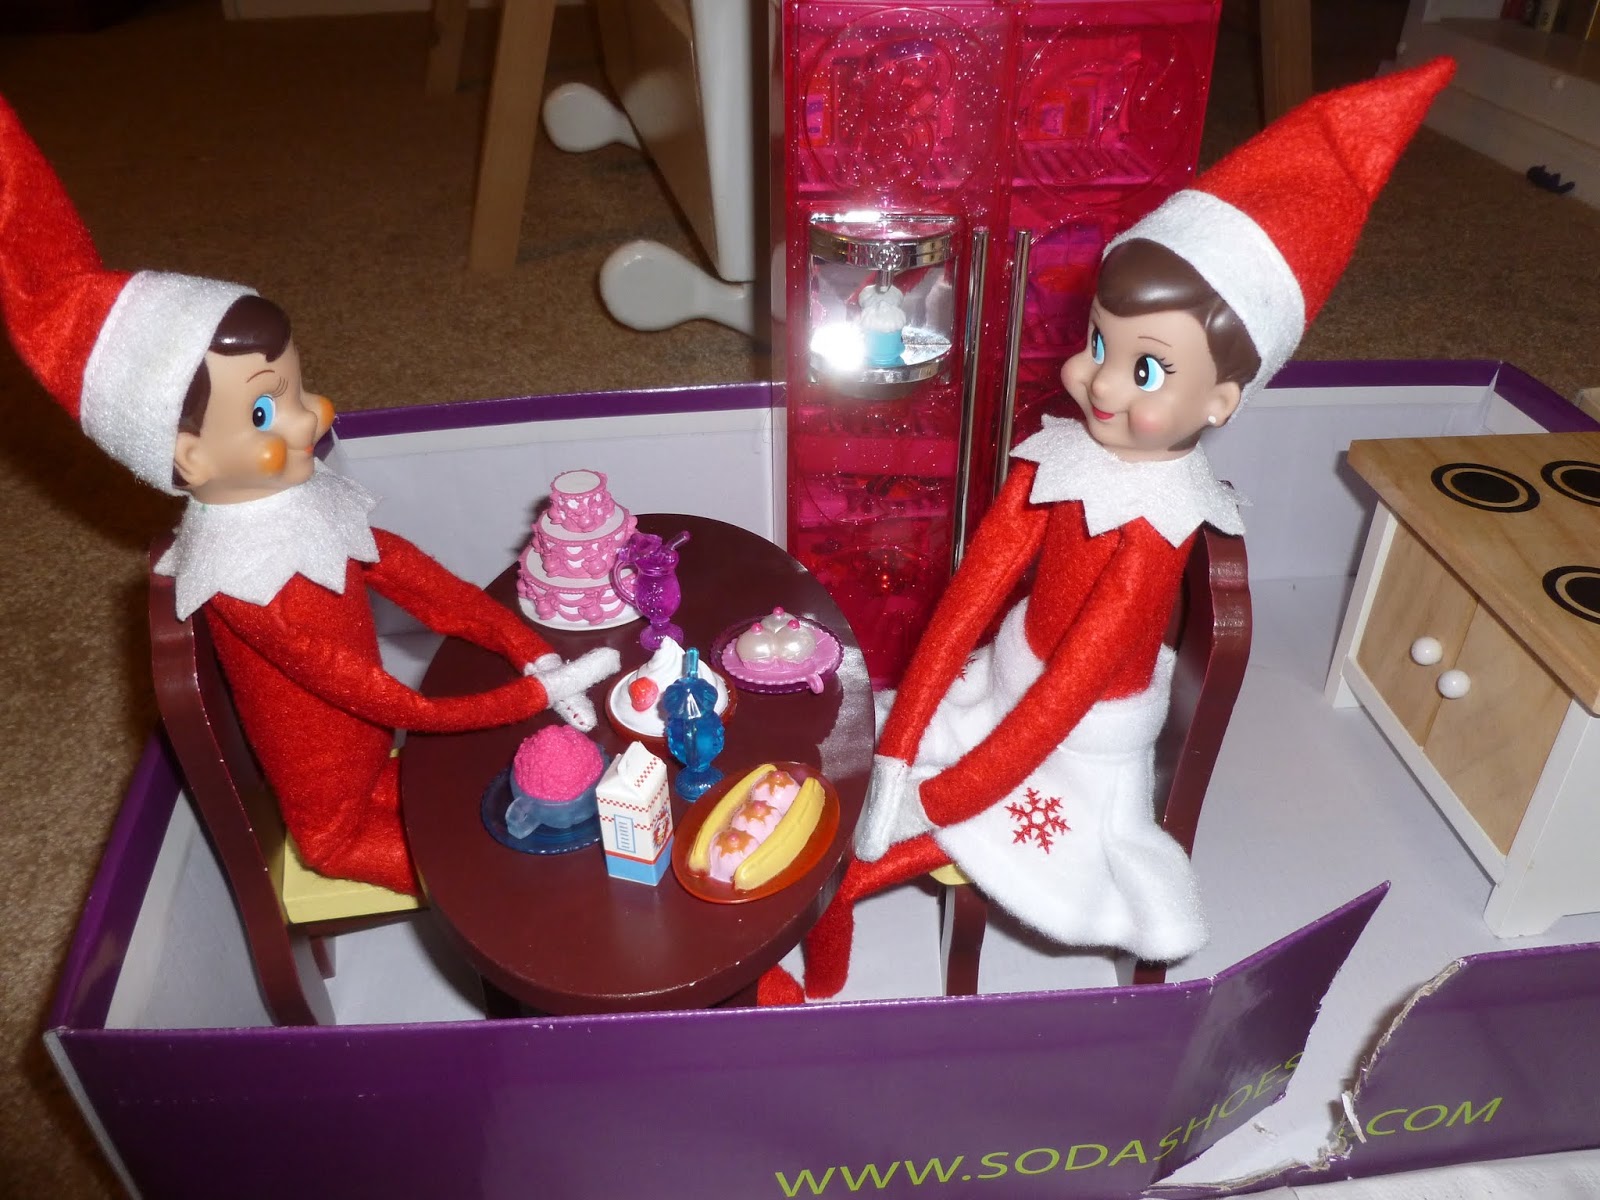 Impending Distractions: Eddie the Elf falls in love - twice